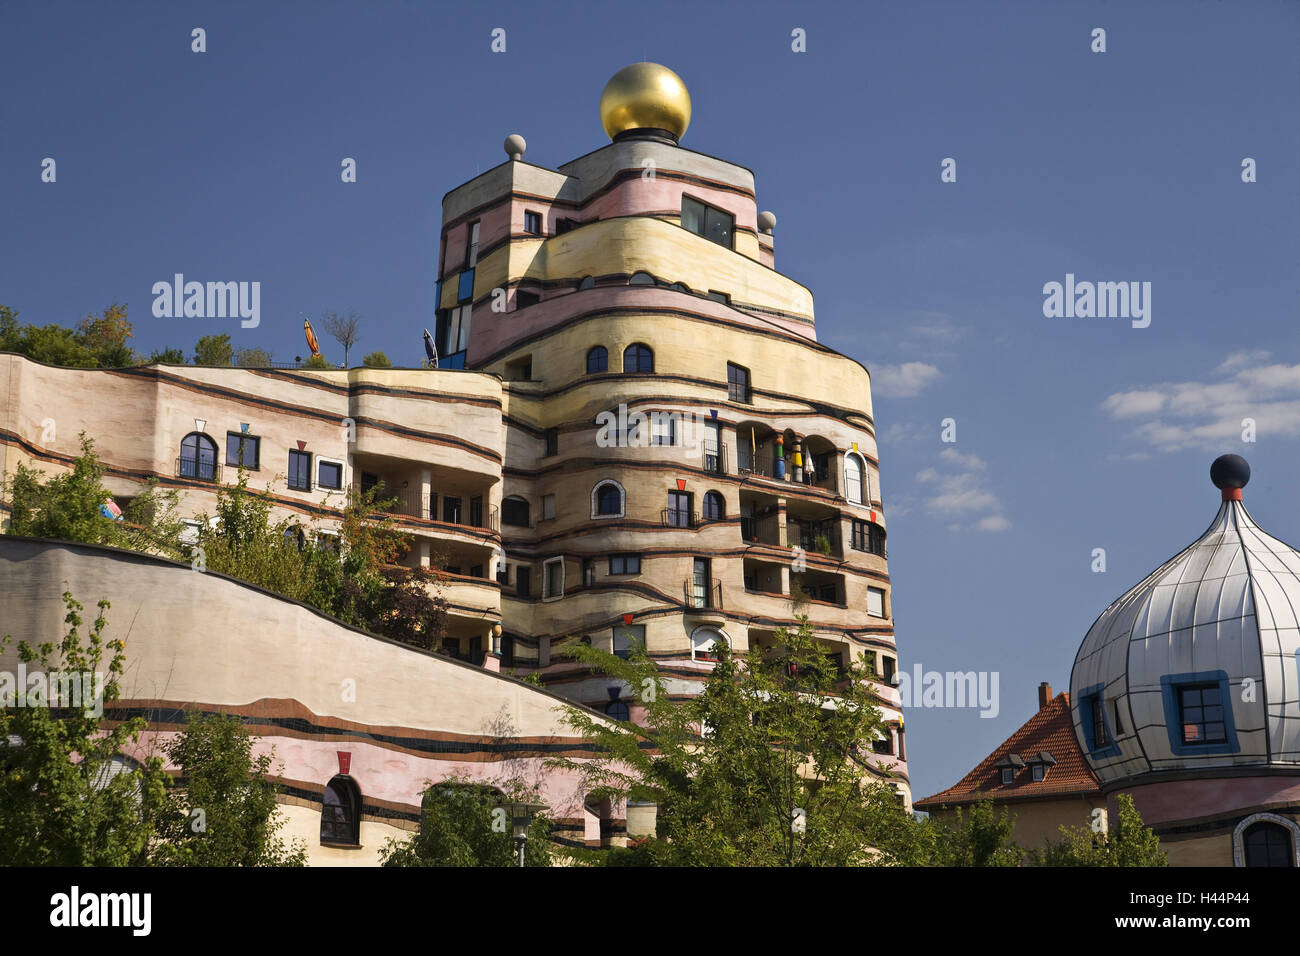 Germany, Hessen, Darmstadt, civil fourth, forest spiral, 100 water house, detail, town, architecture, building, artist, 100 water, residential house, residential complex, architectural style, skilfully, architecture, civil park fourth, place of interest, Stock Photo